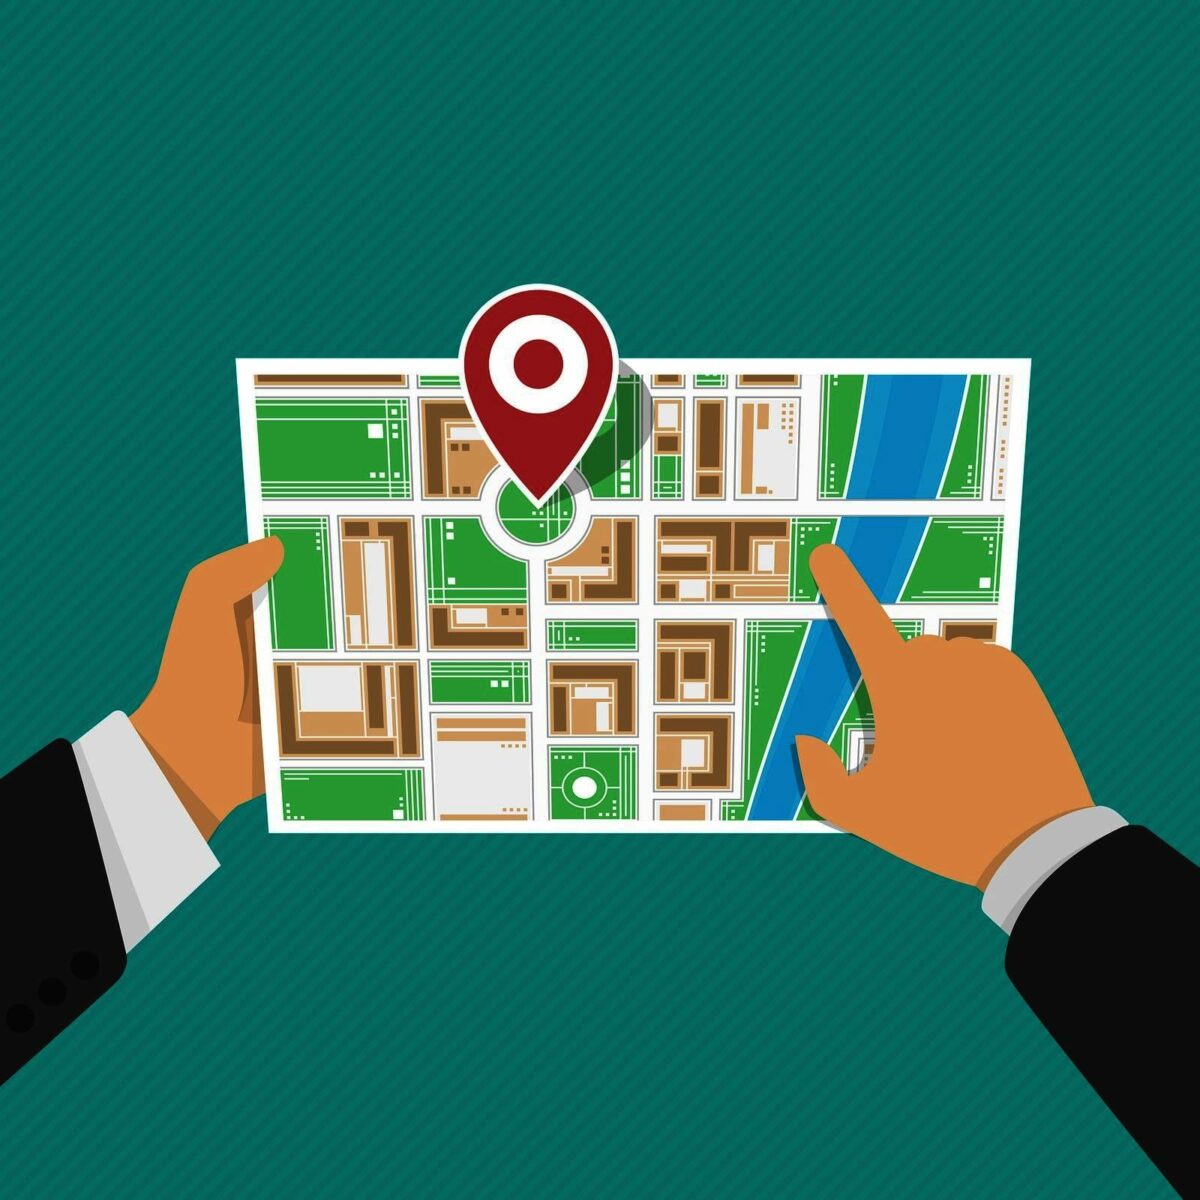 How Important Is Location When Buying a House